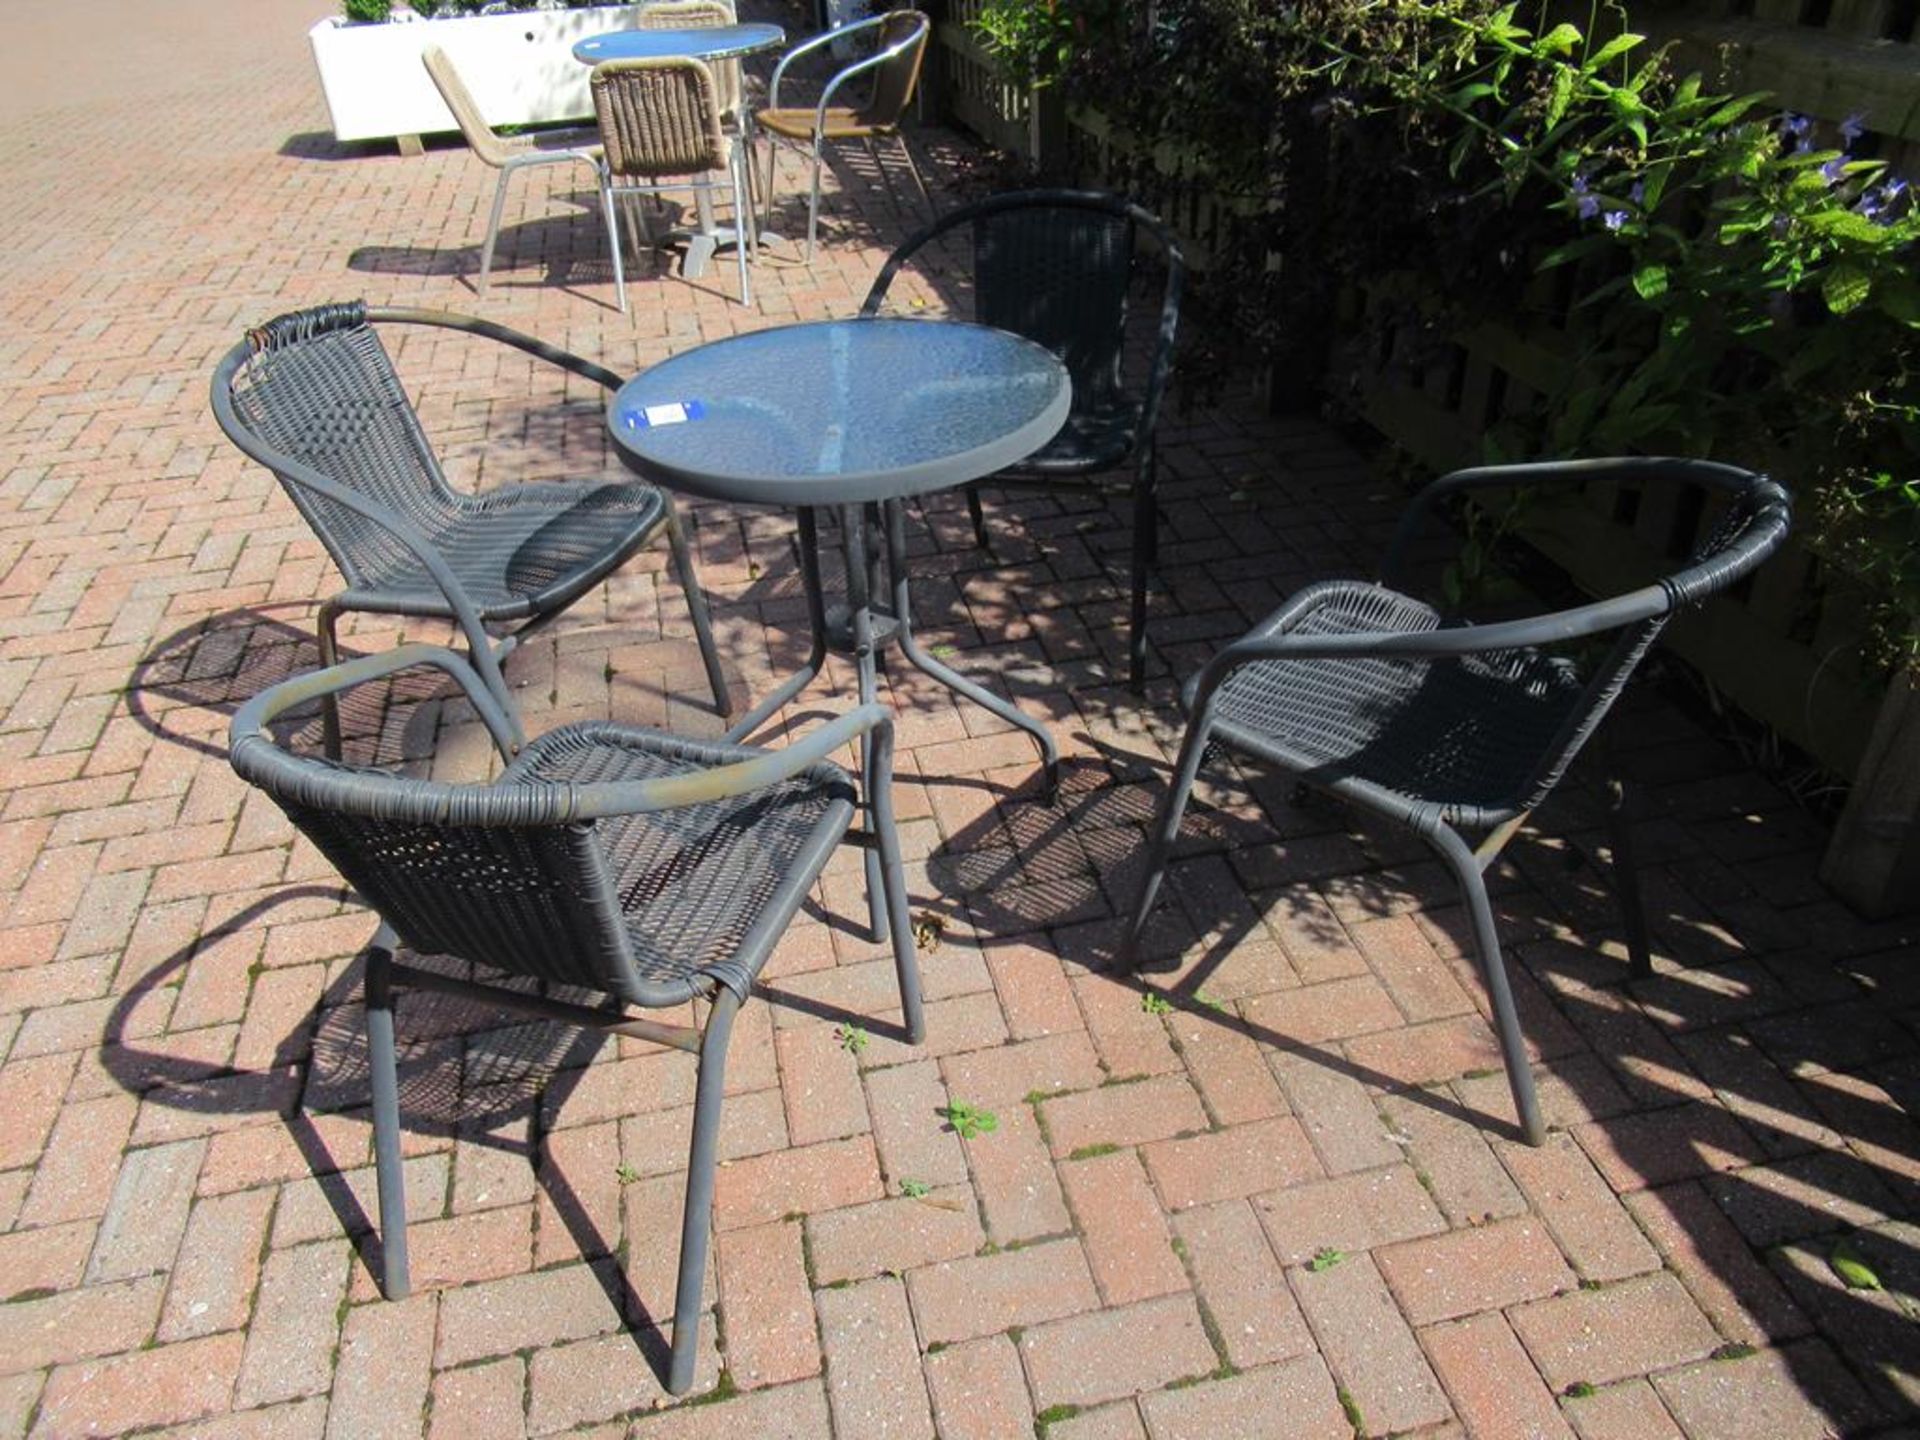 Metal Framed Circular Glass Top Garden Table with 4 x Metal Framed Garden Chairs - Image 2 of 3